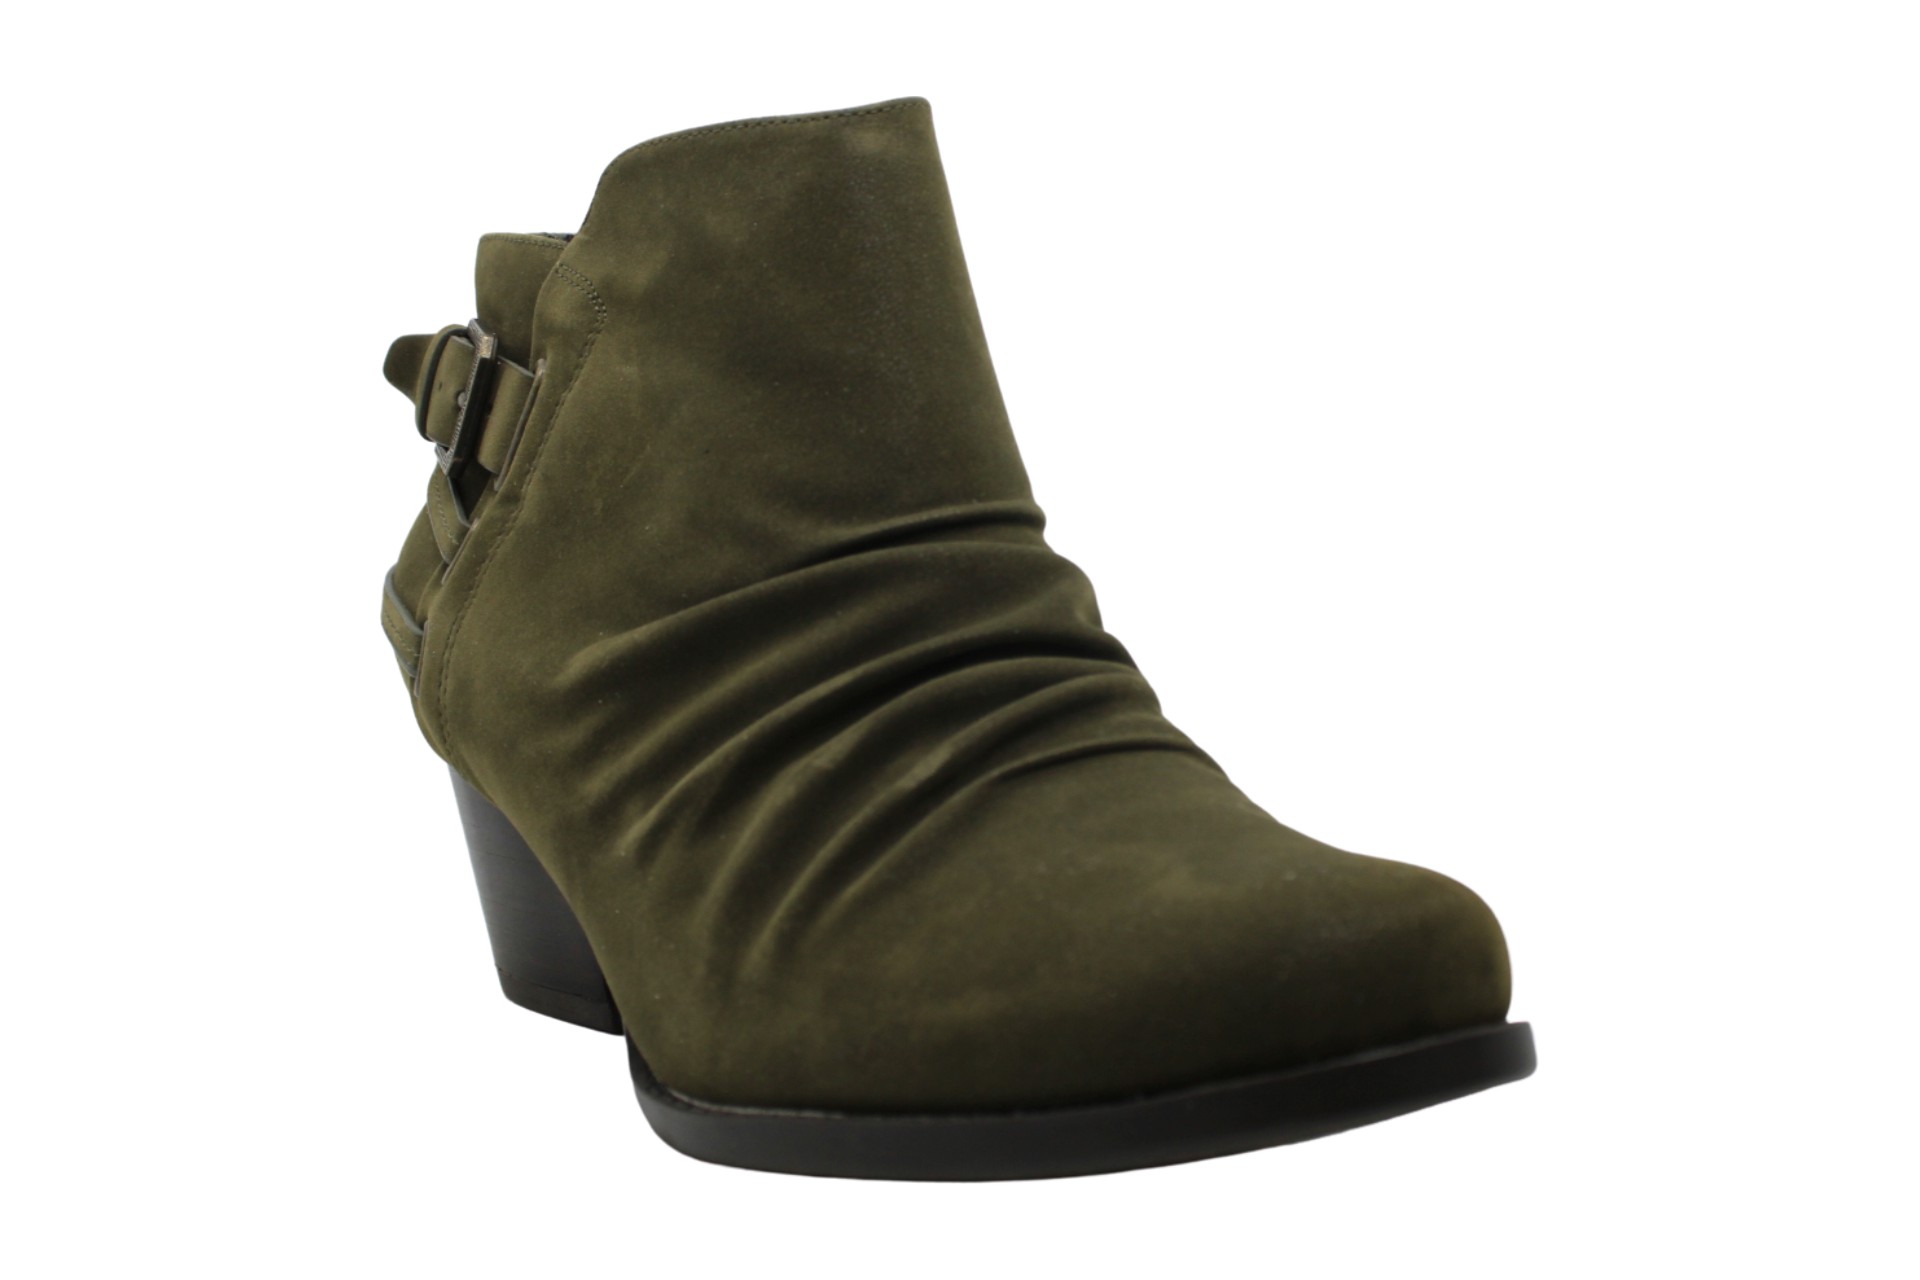 Bare Traps Womens Reid Leather Almond Toe Ankle Fashion Boots Green